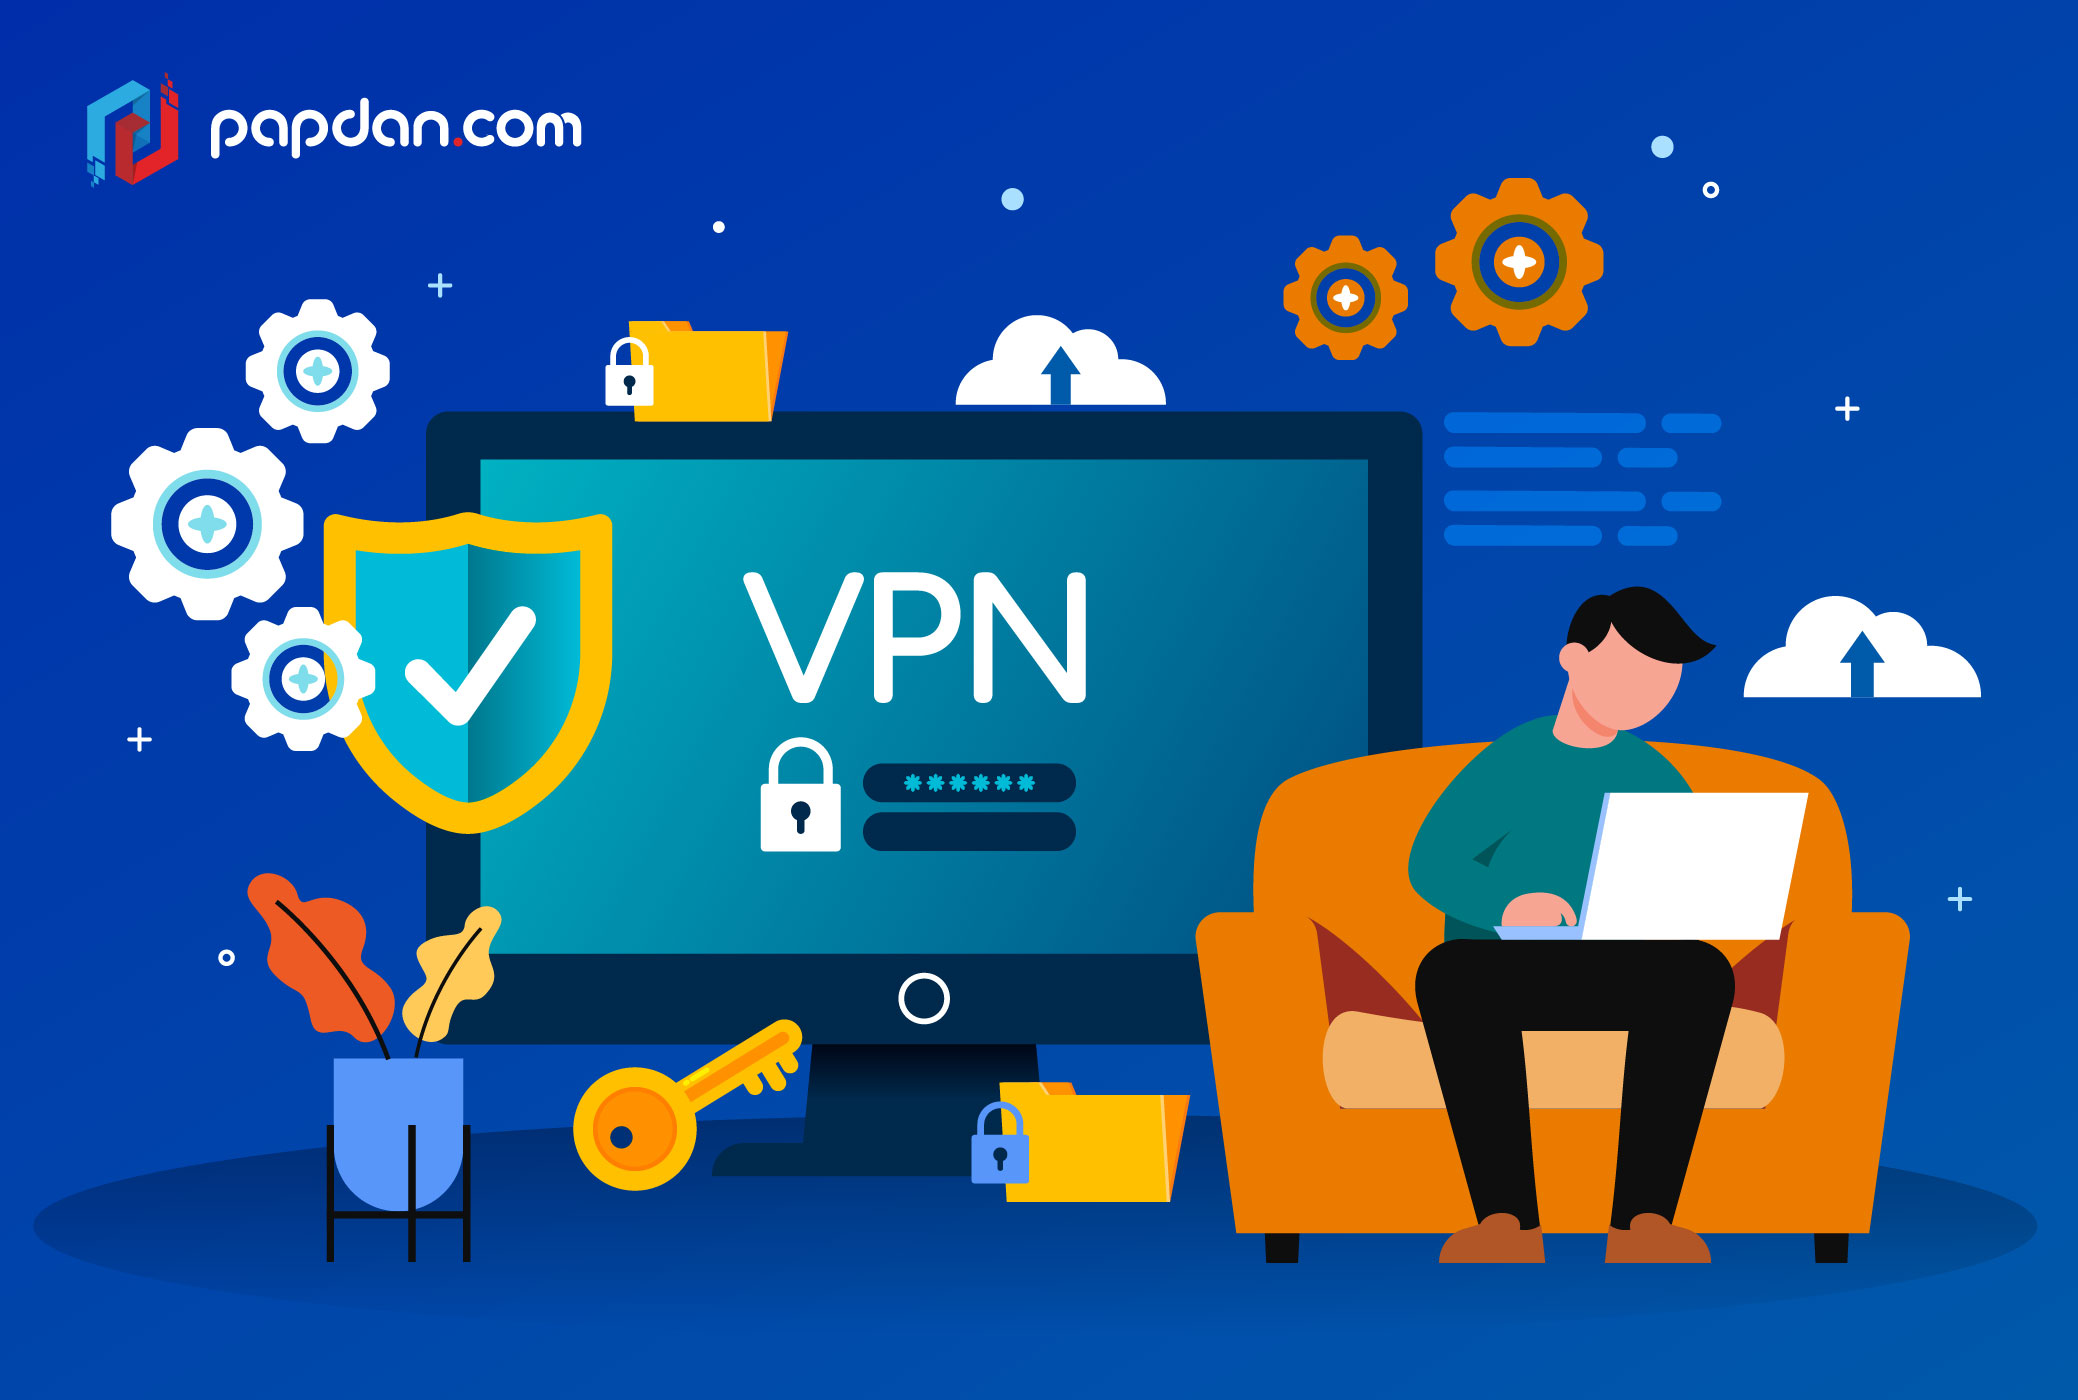 VPN is a Must for Developers! Here are 10 Reasons Why